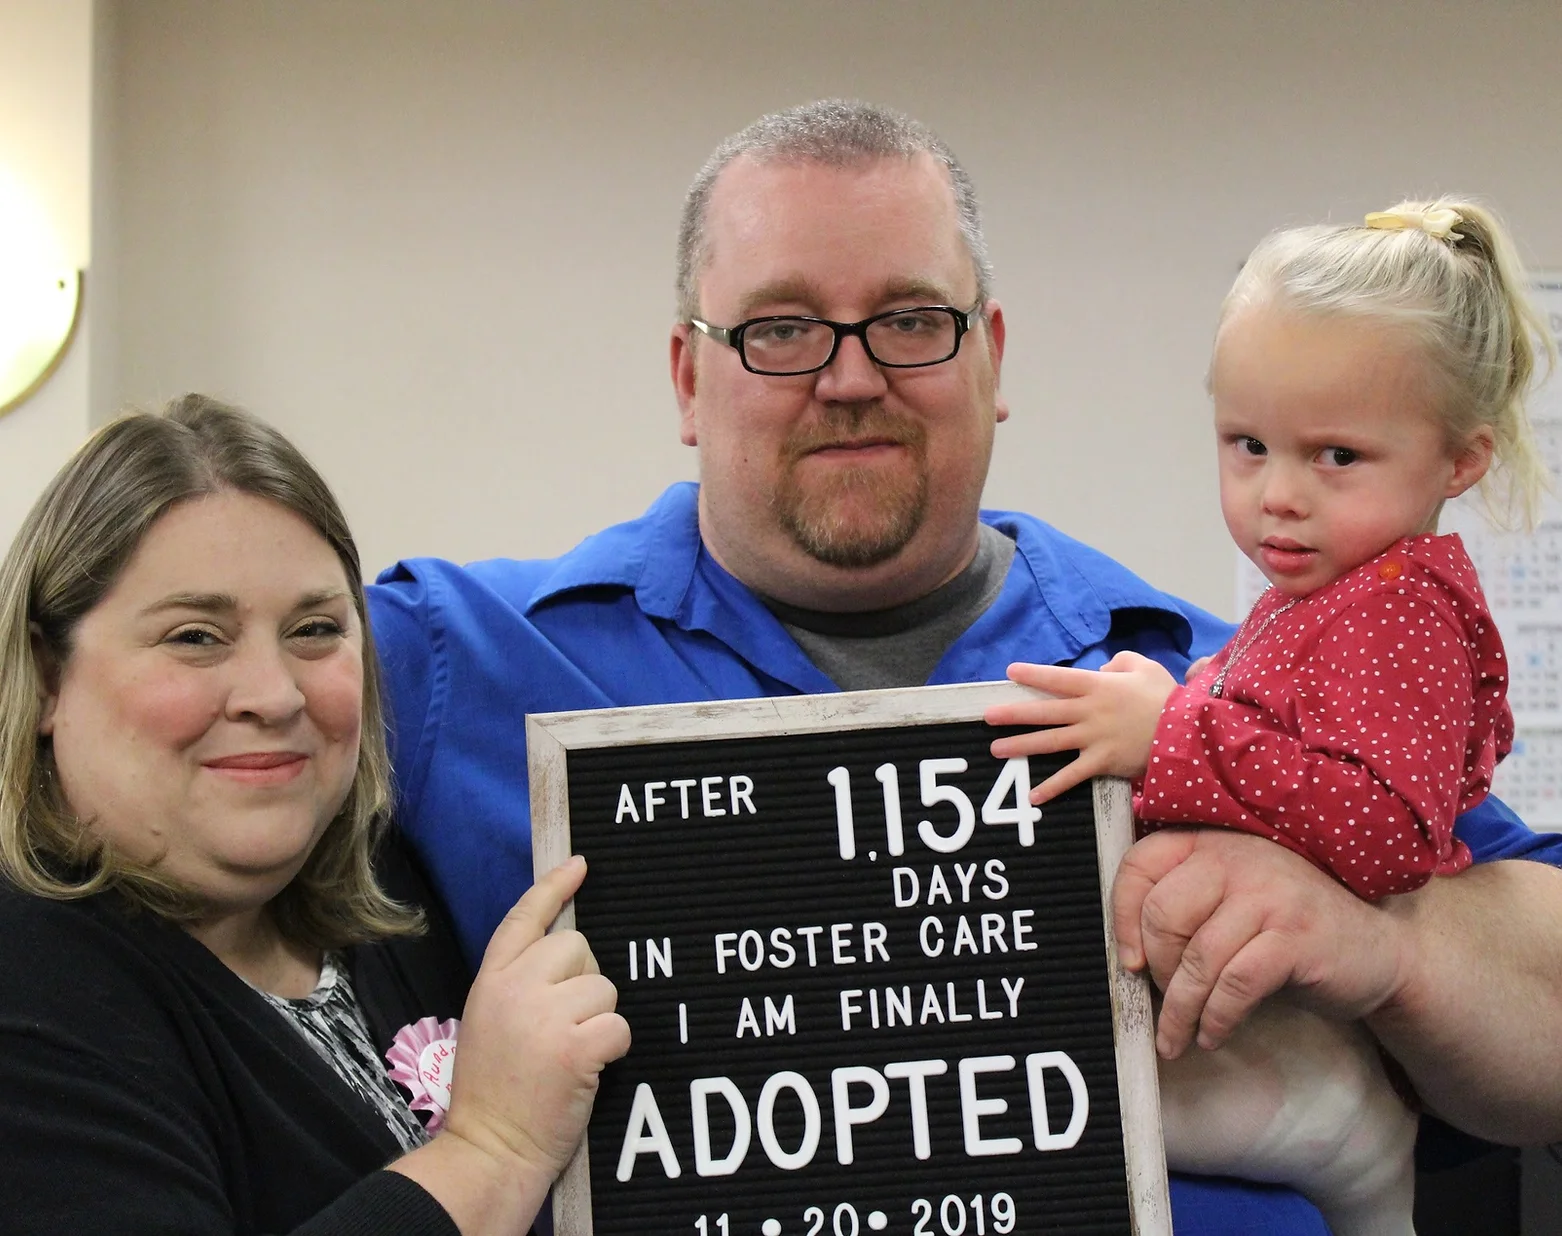 Two foster parents with adopted foster child with a sign that reads "after 1,154 days in foster care, I am finally adopted."